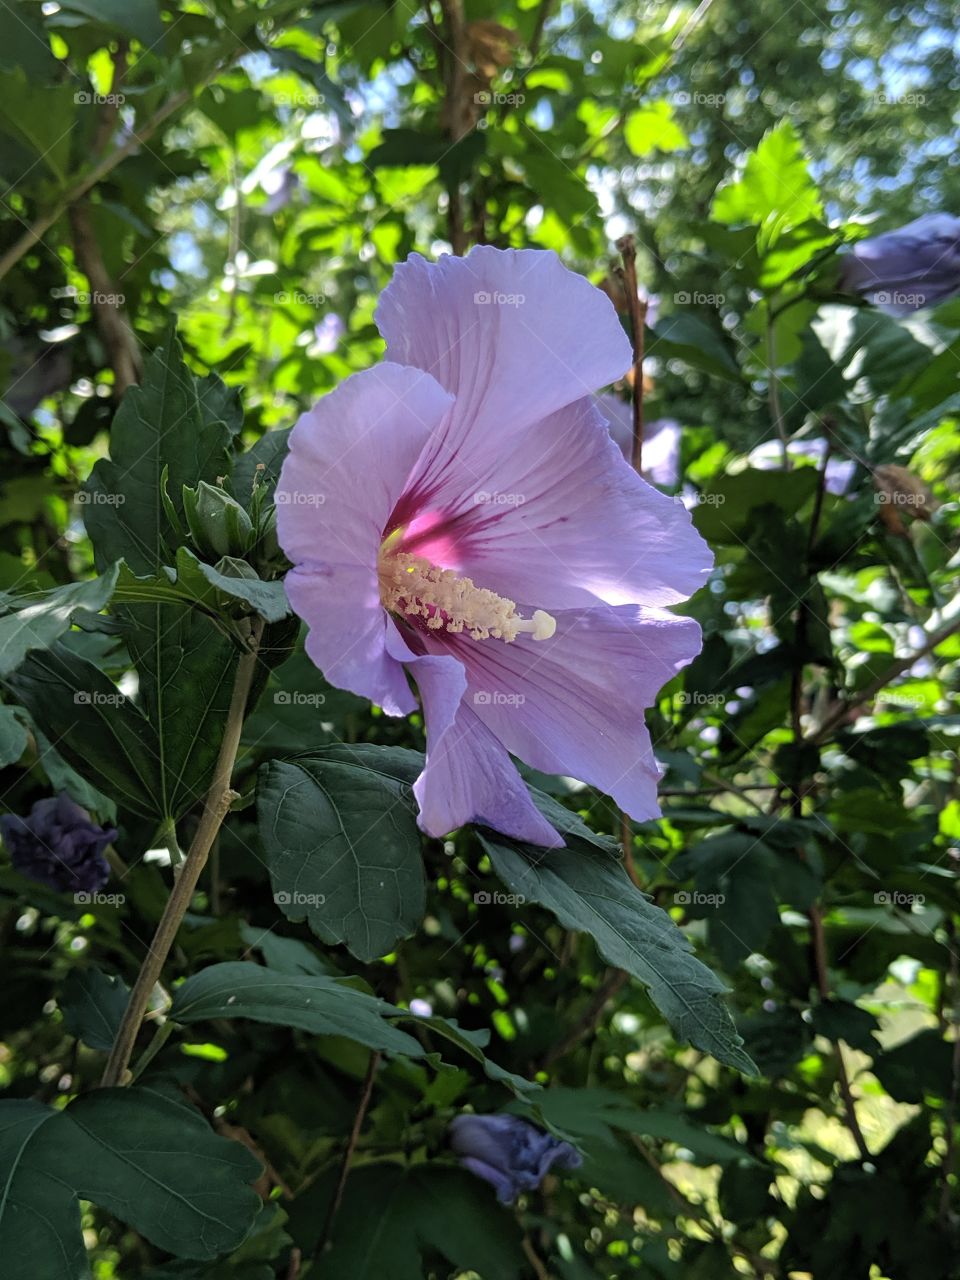 Hibiscus blossom in the shade